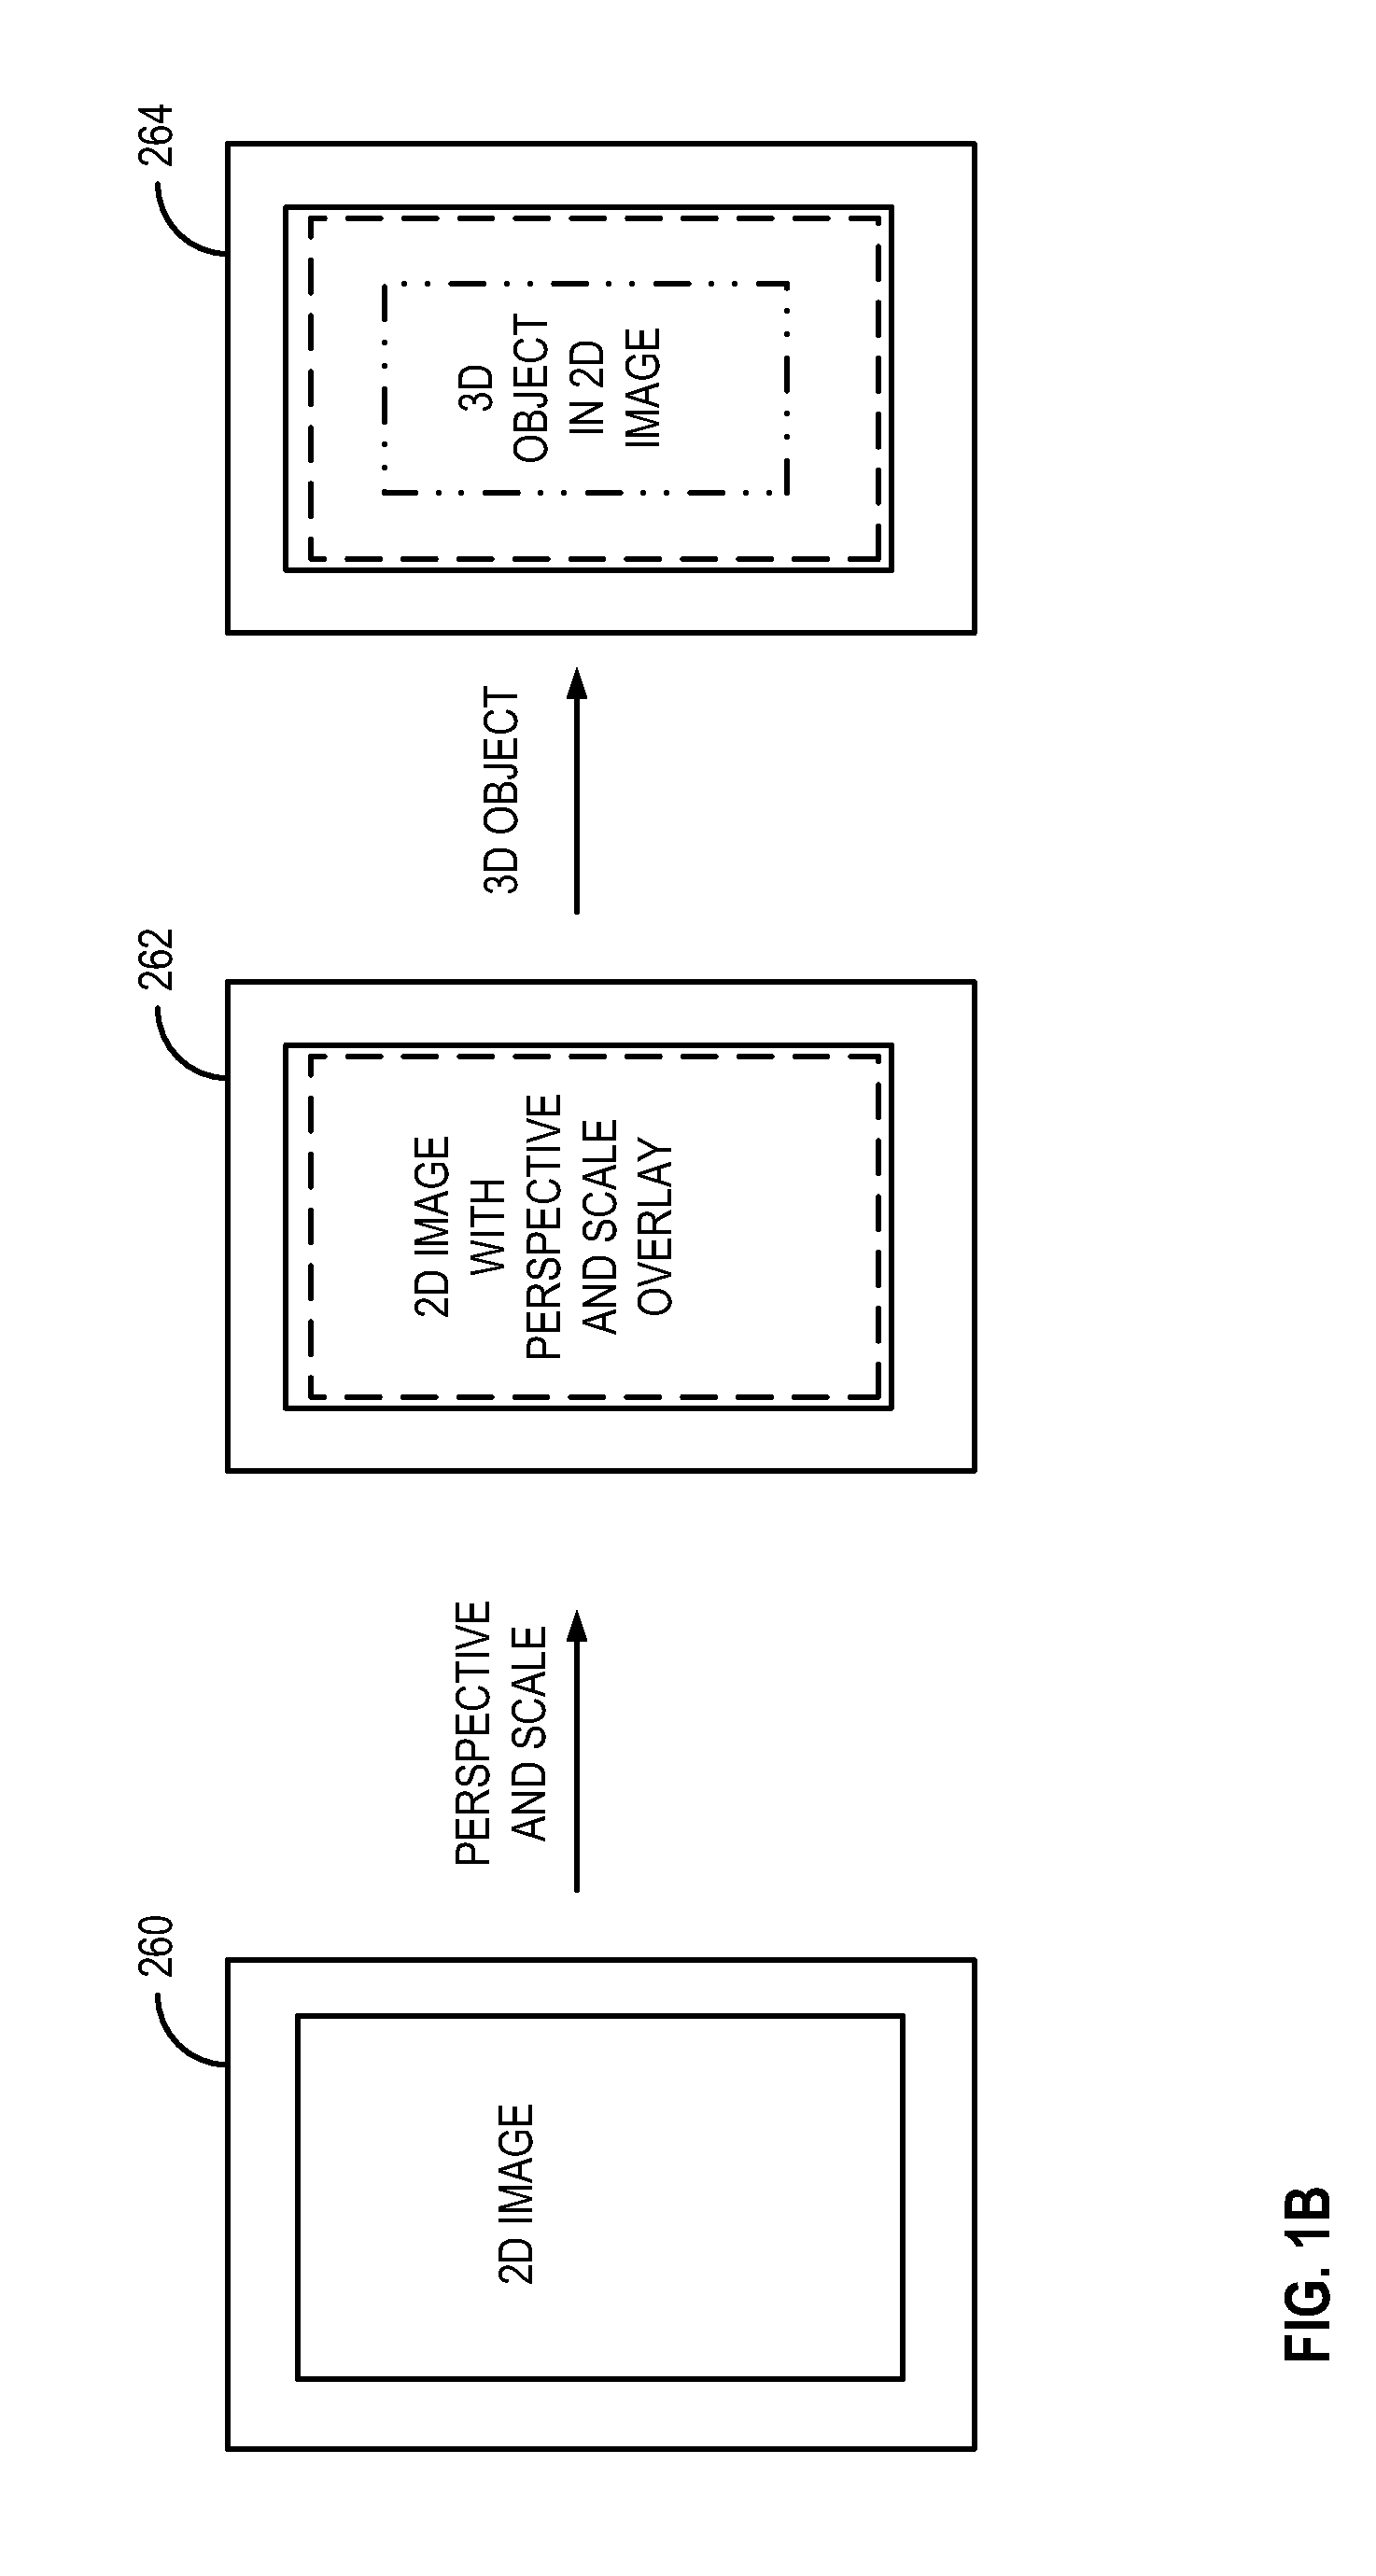 Method for providing scale to align 3D objects in 2d environment